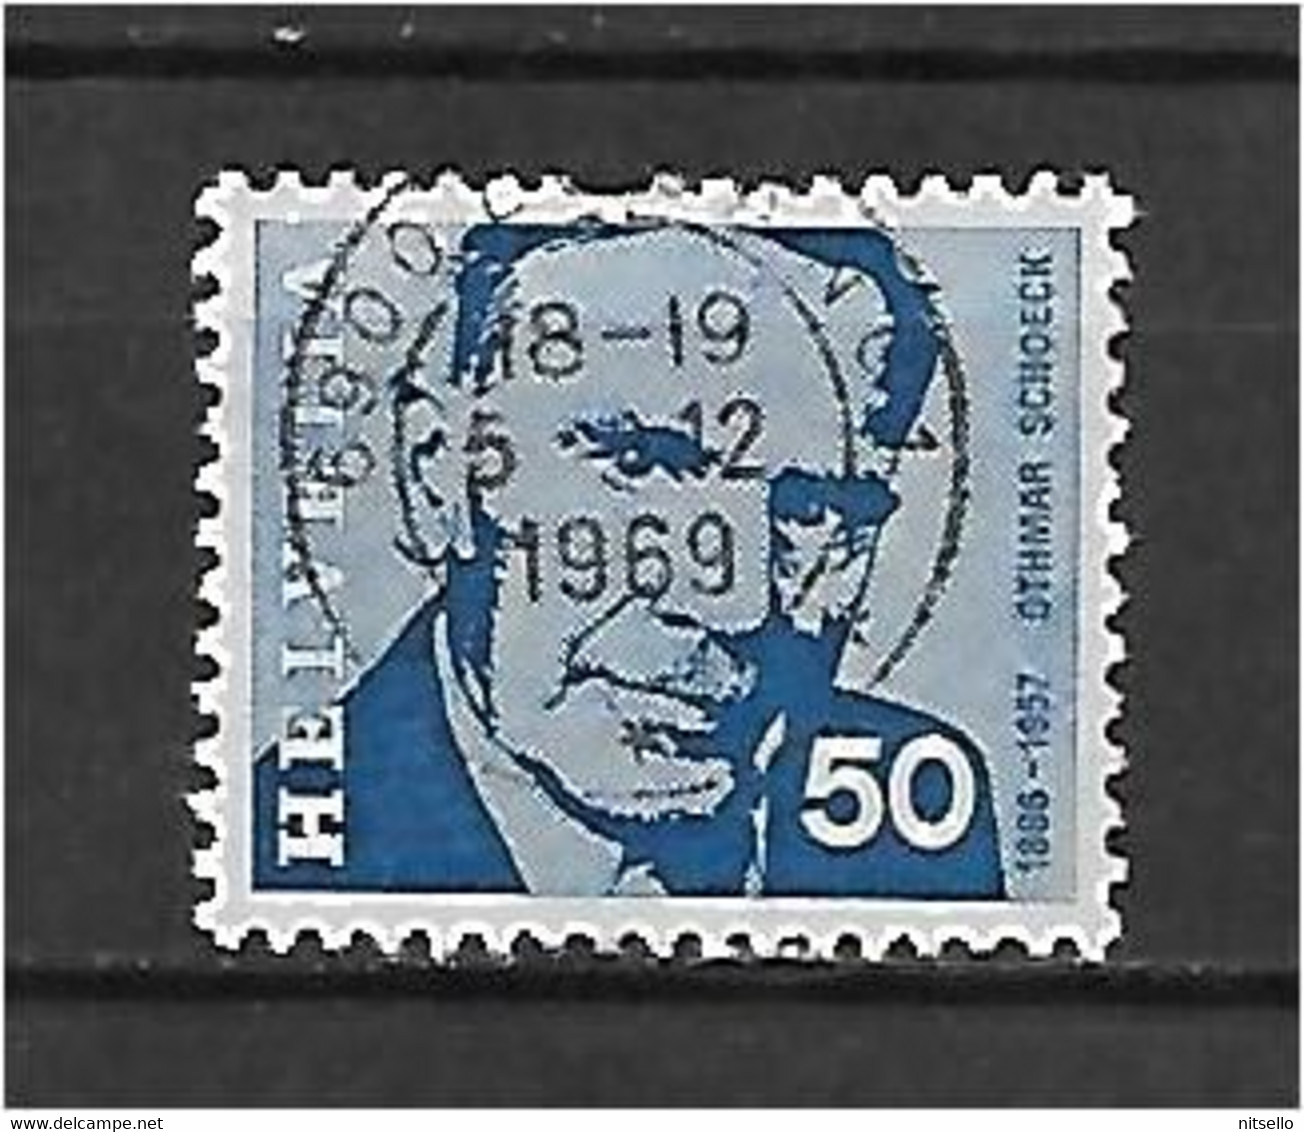 LOTE 1530  ///  SUIZA   YVERT Nº: 844  ¡¡¡ OFERTA - LIQUIDATION - JE LIQUIDE !!! - Used Stamps